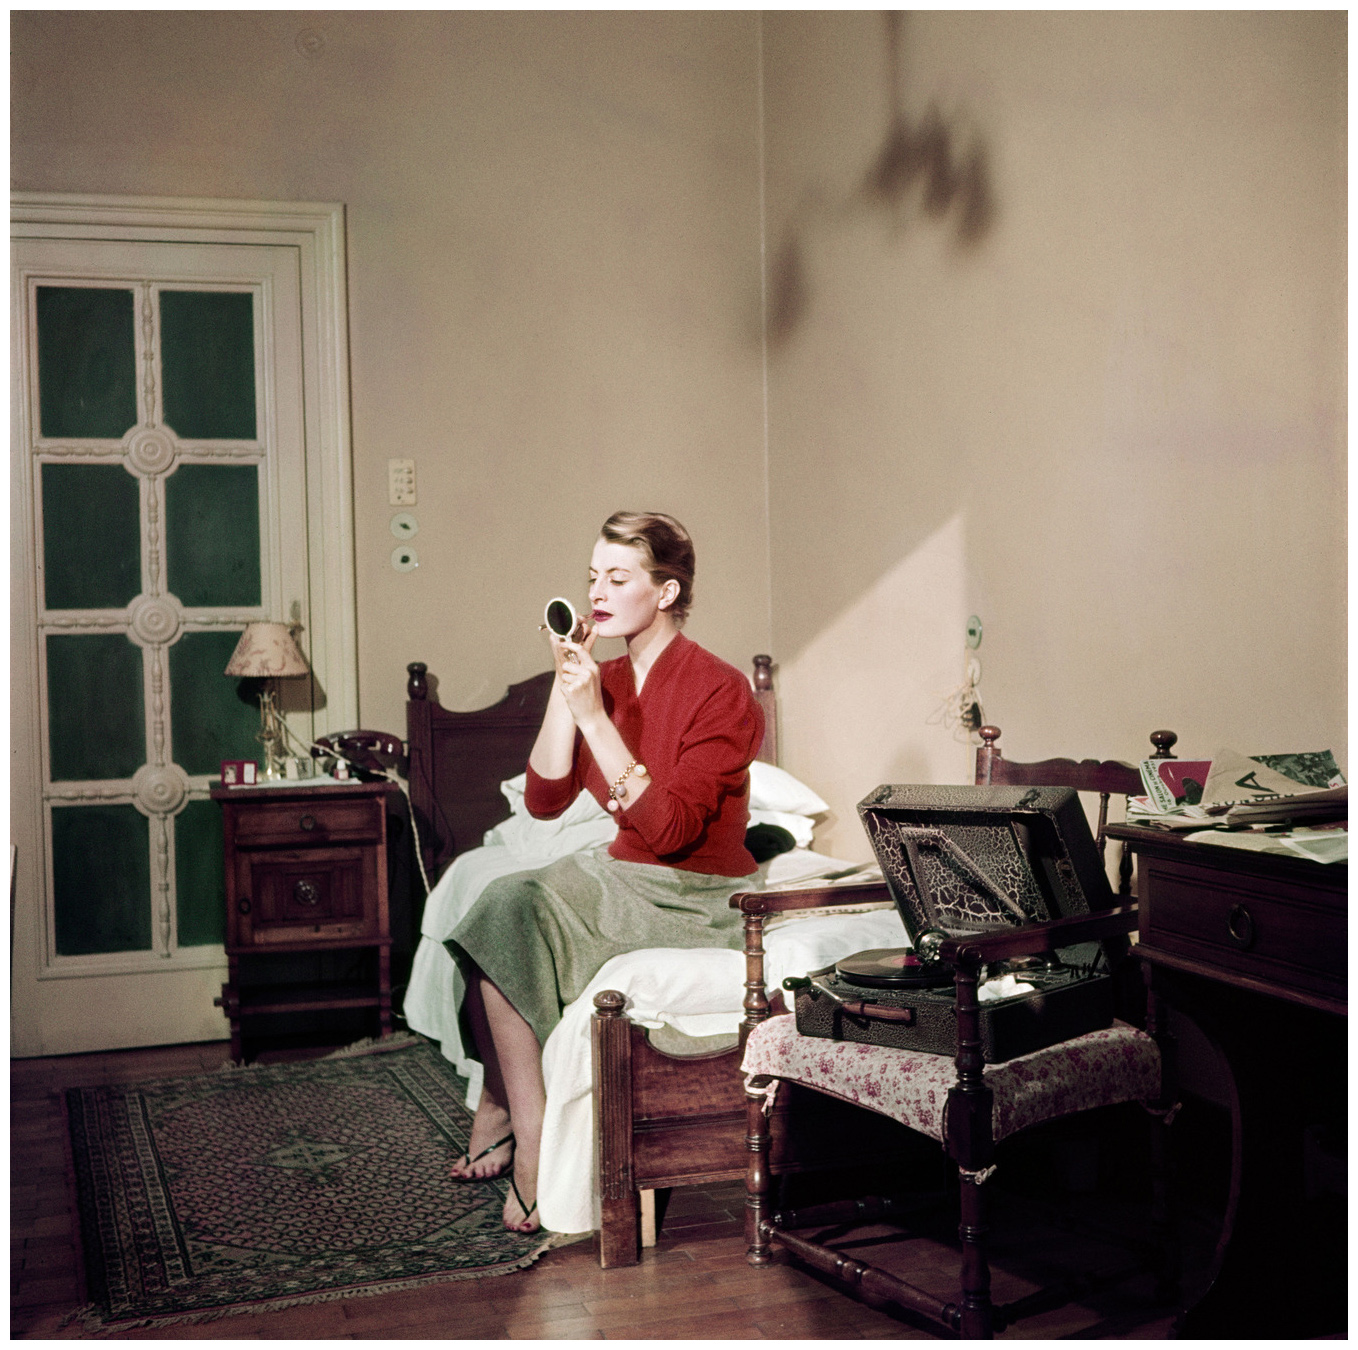 robert-capa-capucine-french-model-and-actress-in-her-hotel-room-rome-august-1951-c2a9-robert-capainternational-center-of-photographymagnum-photos